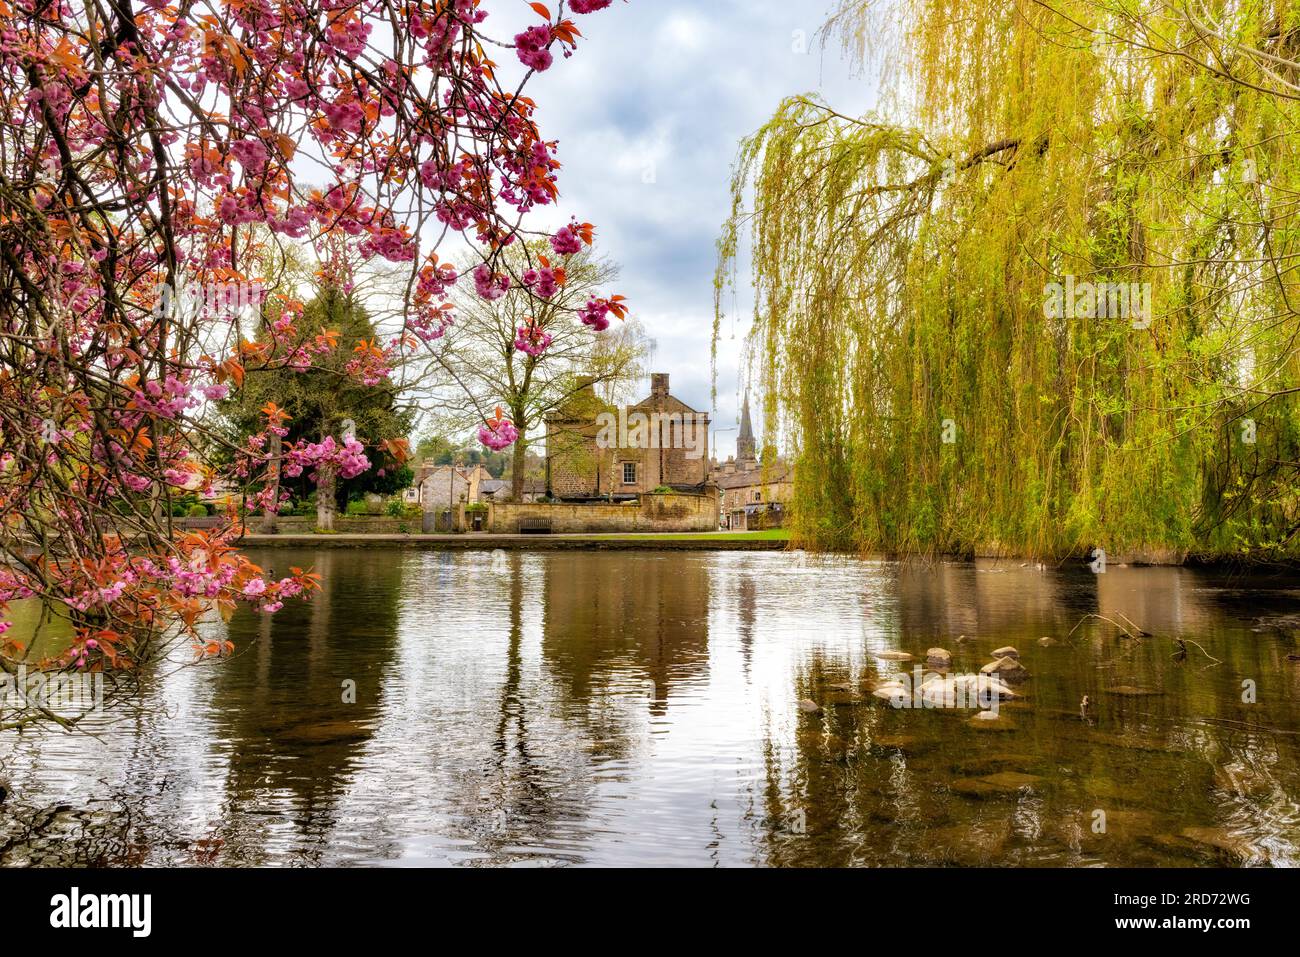 A view of the river Wye in the Peak District market town of Bakewell in Derbyshire. UK Stock Photo